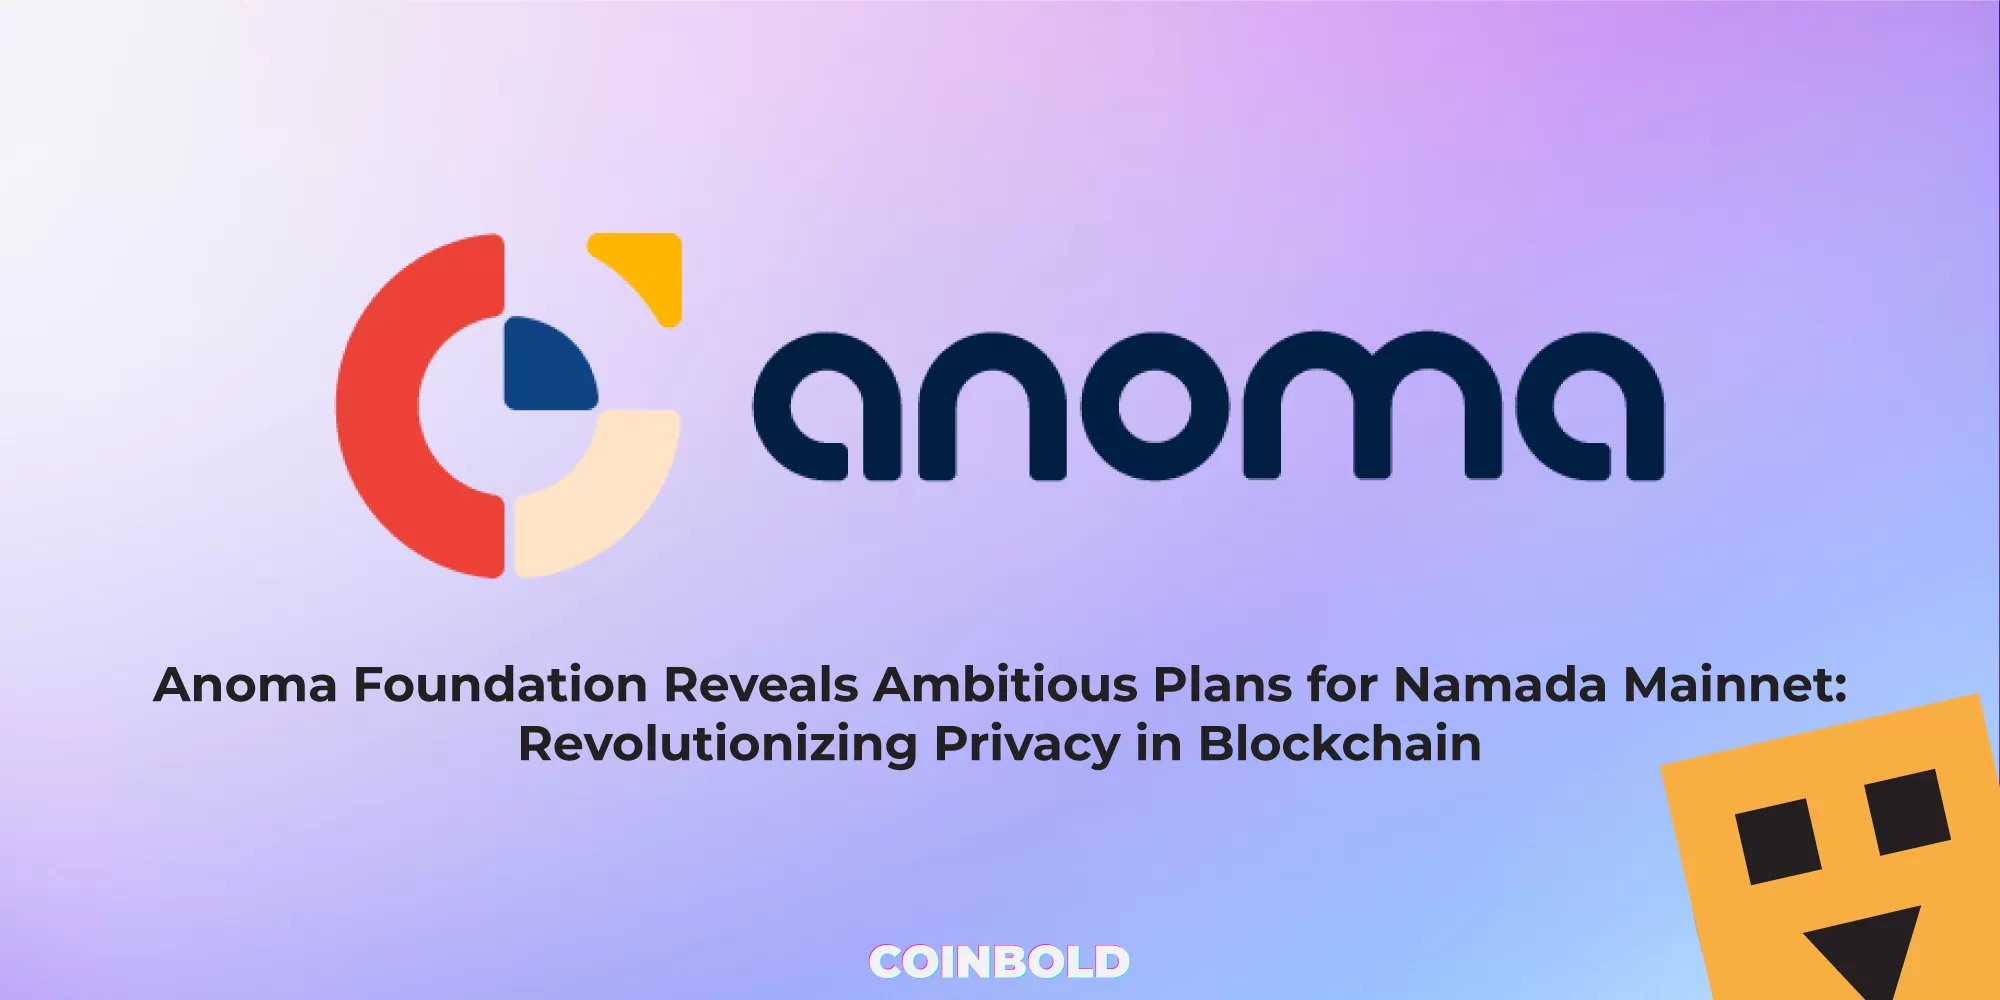 Anoma Foundation Reveals Ambitious Plans for Namada Mainnet Revolutionizing Privacy in Blockchain